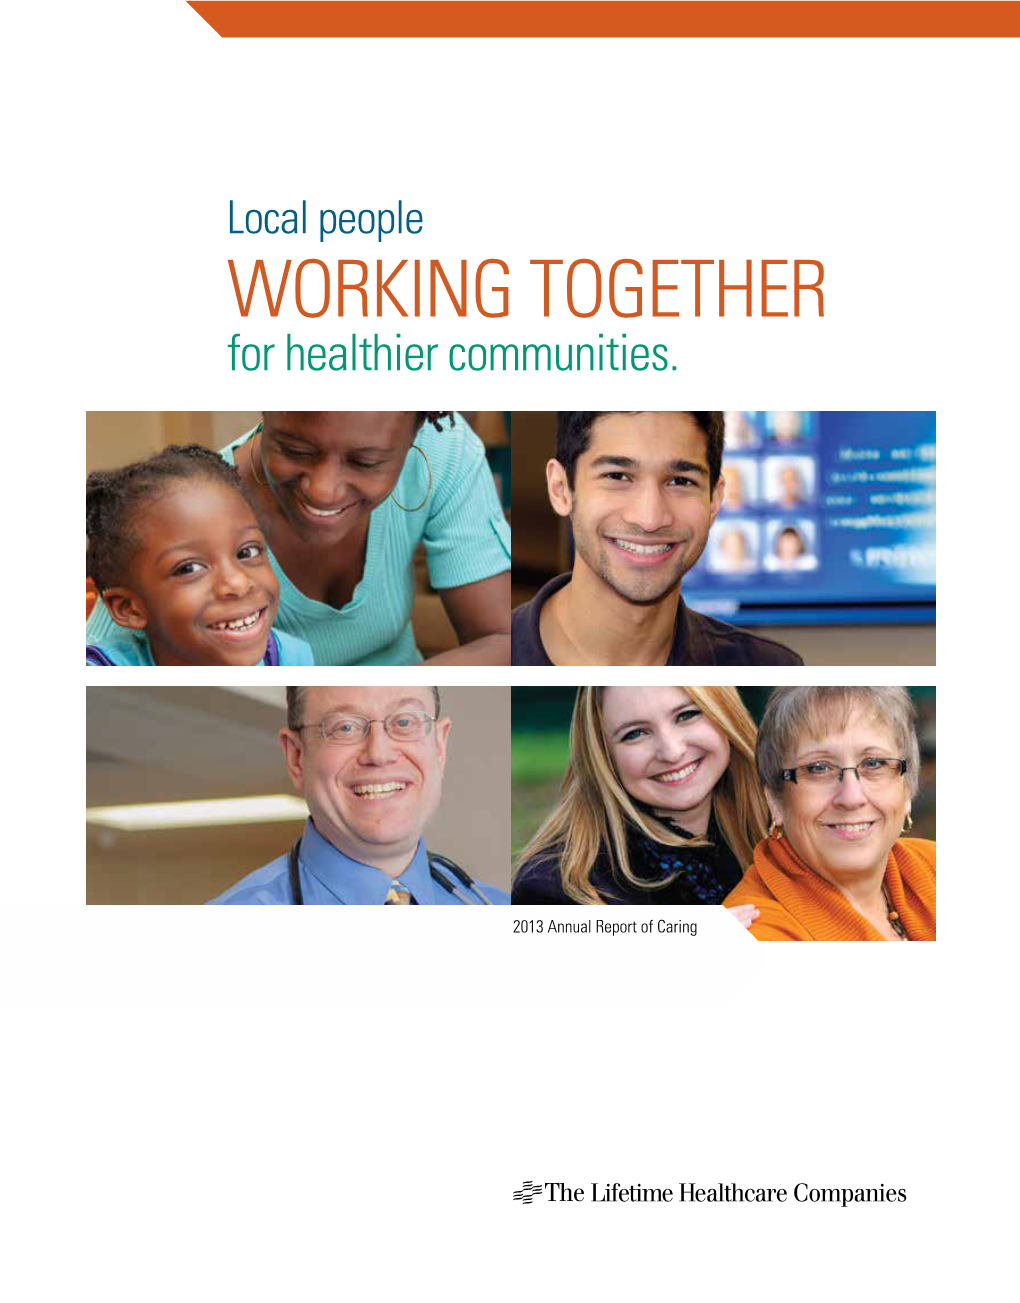 WORKING TOGETHER for Healthier Communities